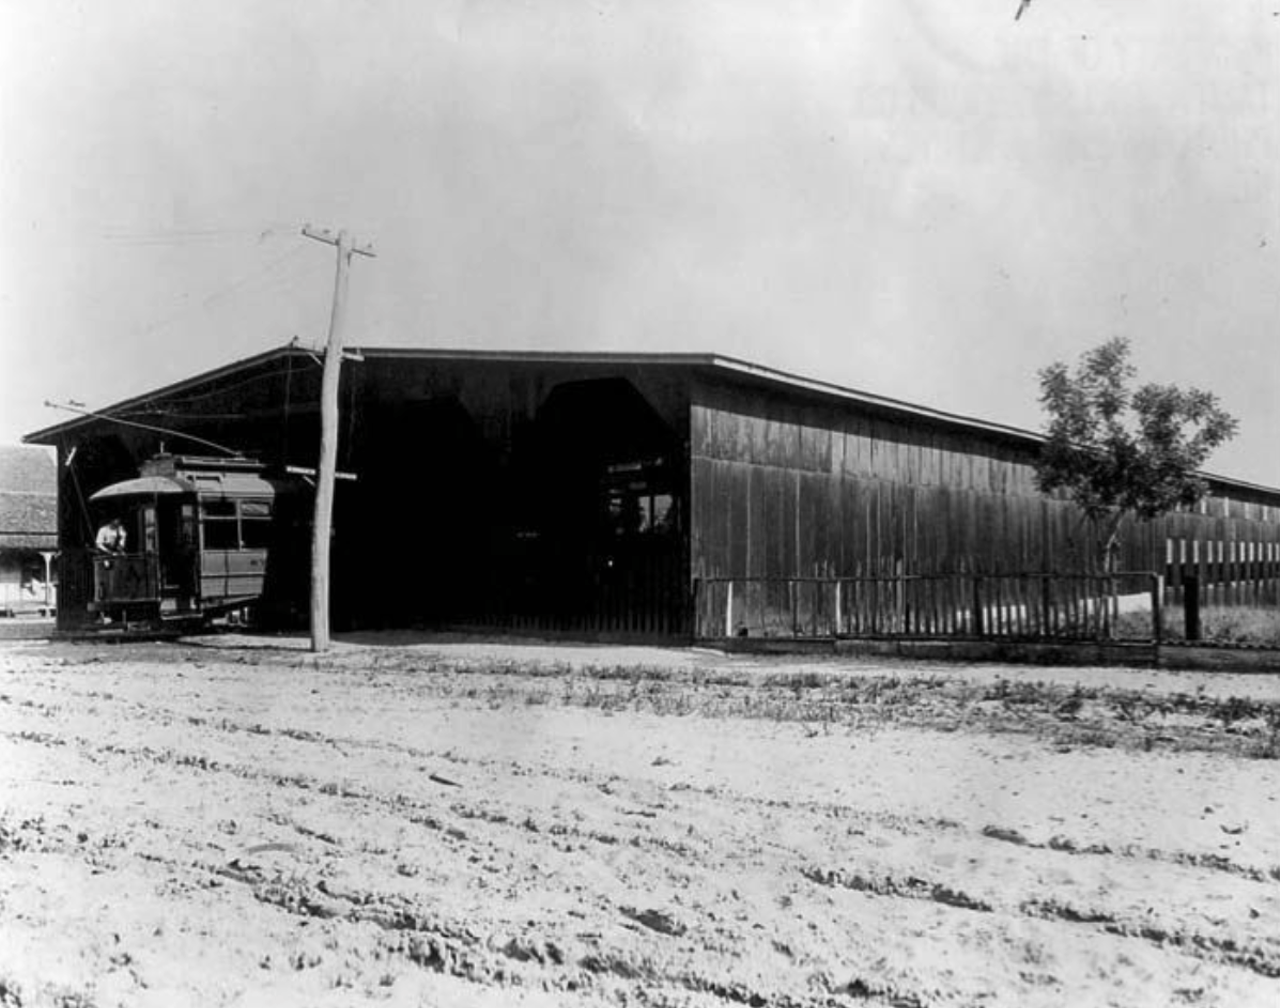 Ballast Point streetcar station, trolley emerging from entrance in Tampa, Florida in 1911.
Photo by Burgert Brothers via Tampa-Hillsborough County Public Library System